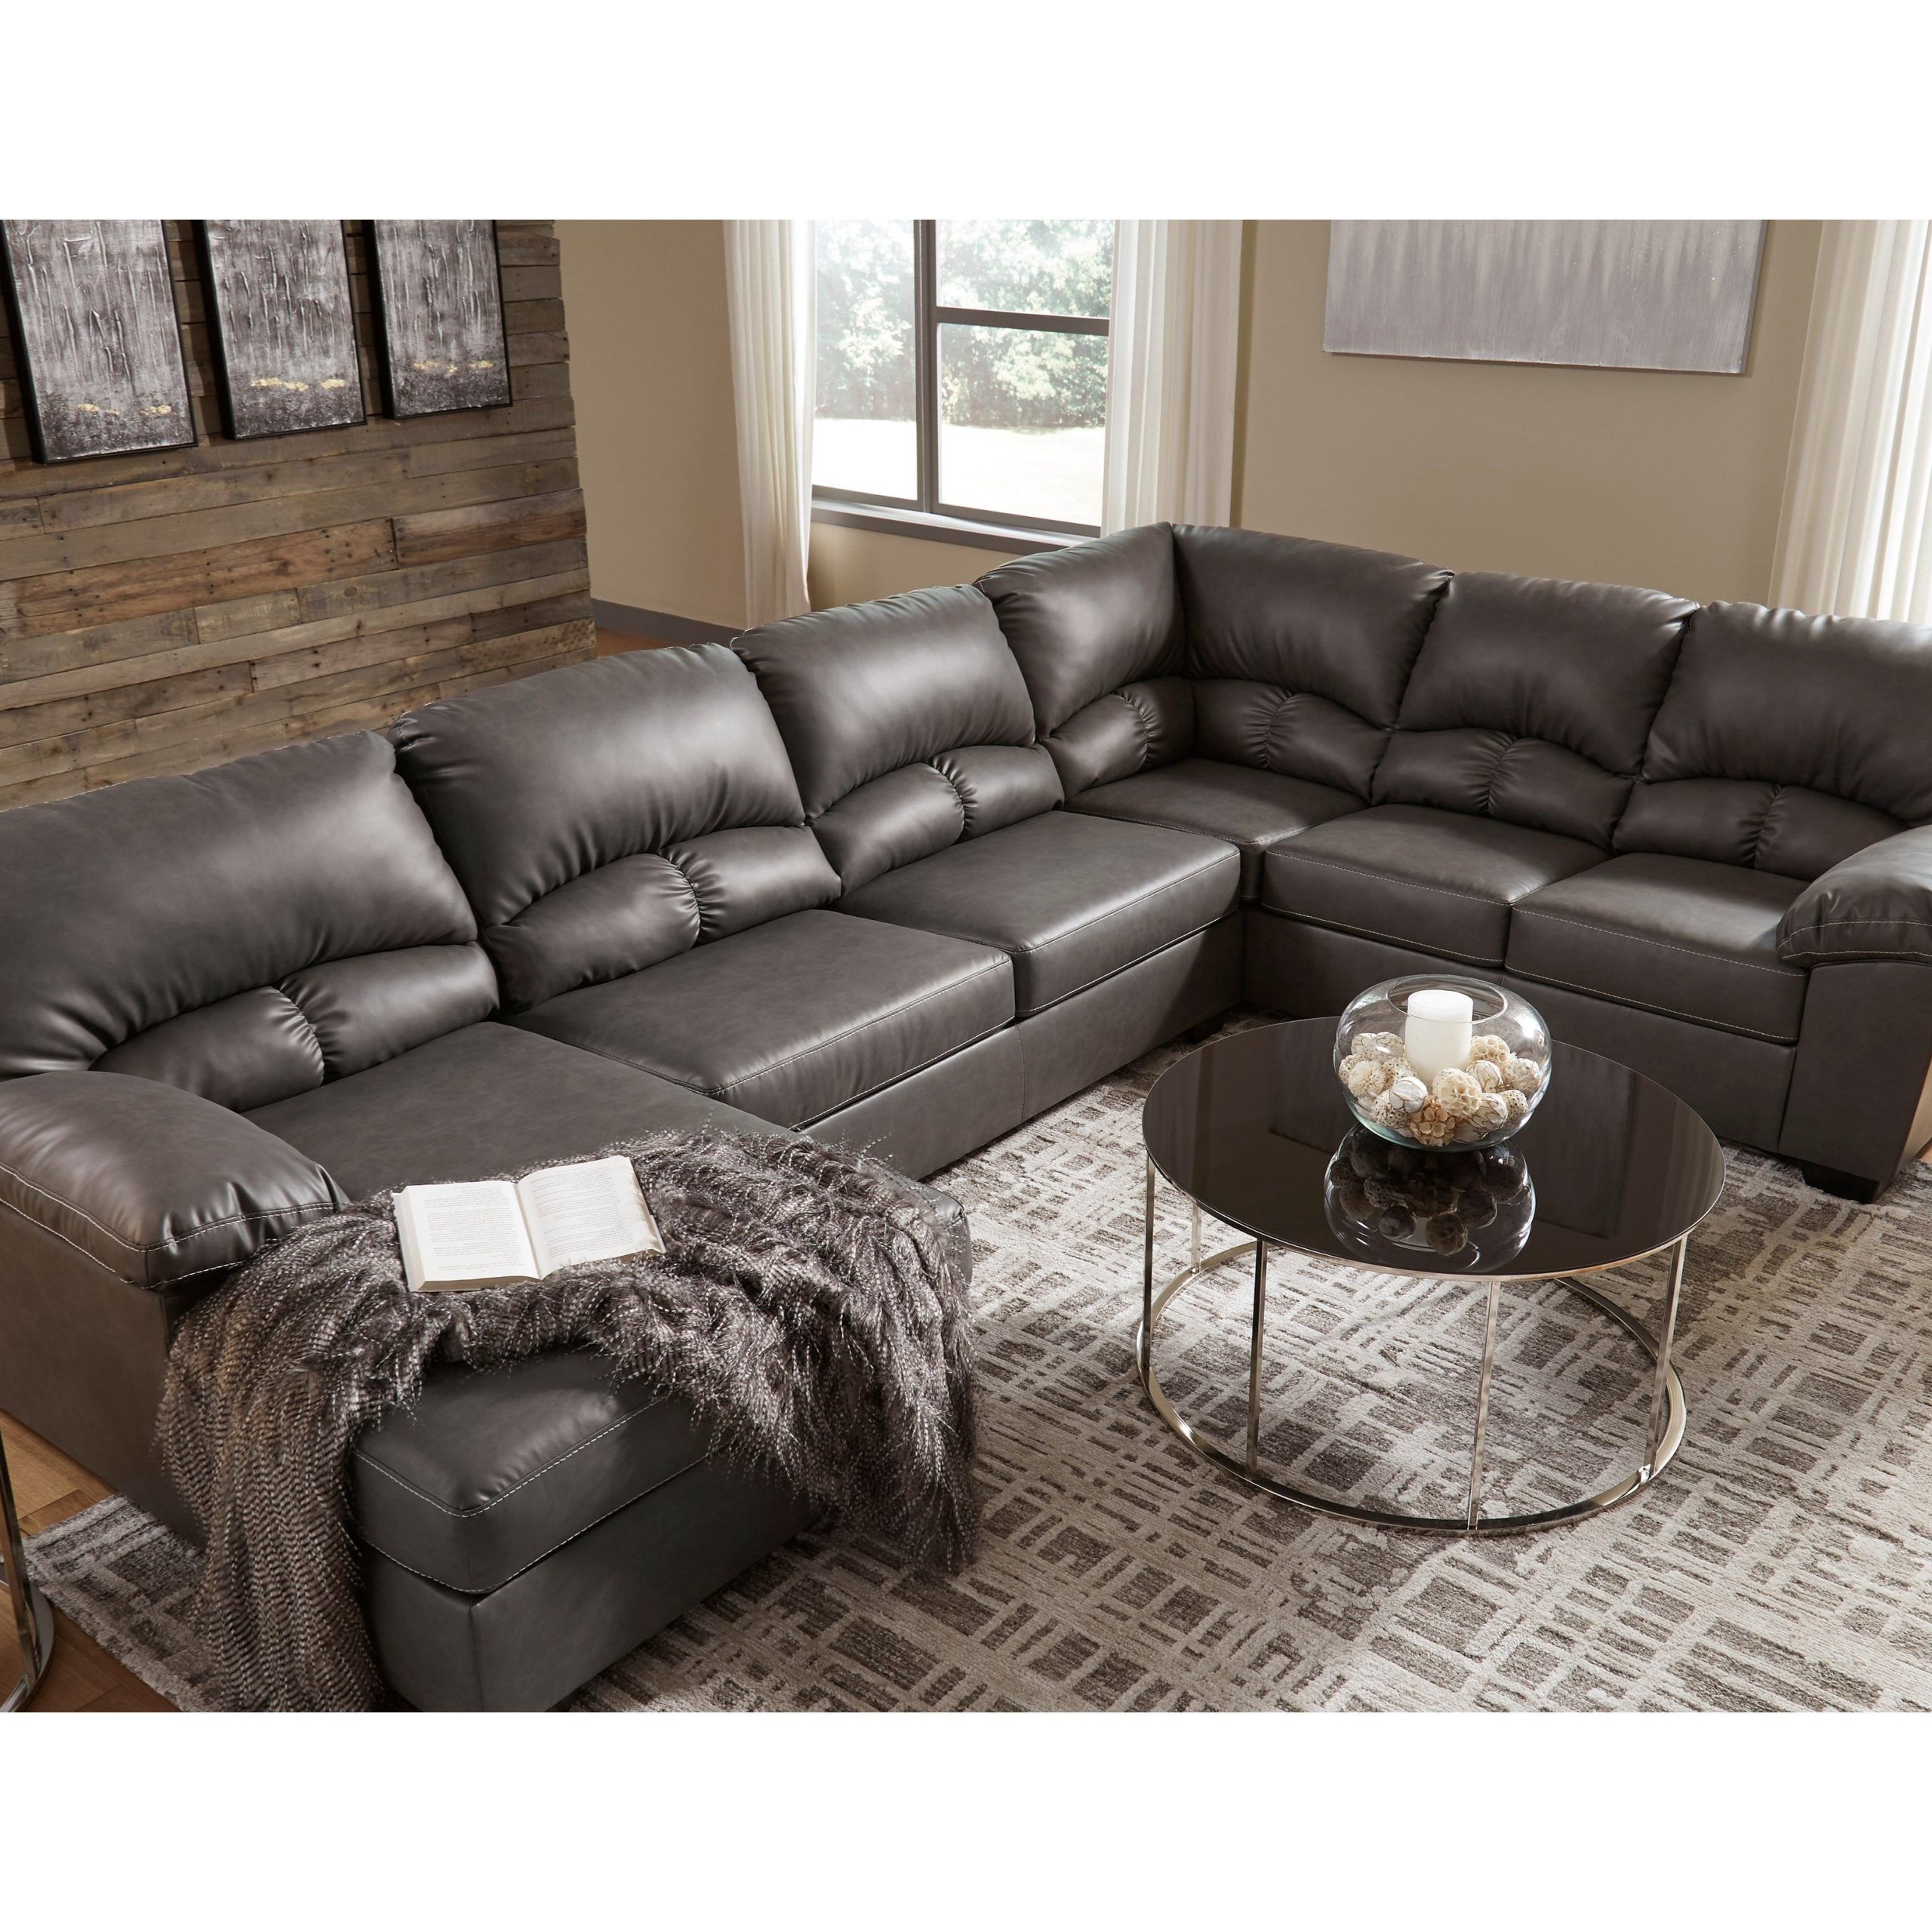 Benchcraft Aberton Faux Leather 3 Piece Sectional With Chaise | Wayside Throughout Faux Leather Sectional Sofa Sets (View 2 of 20)